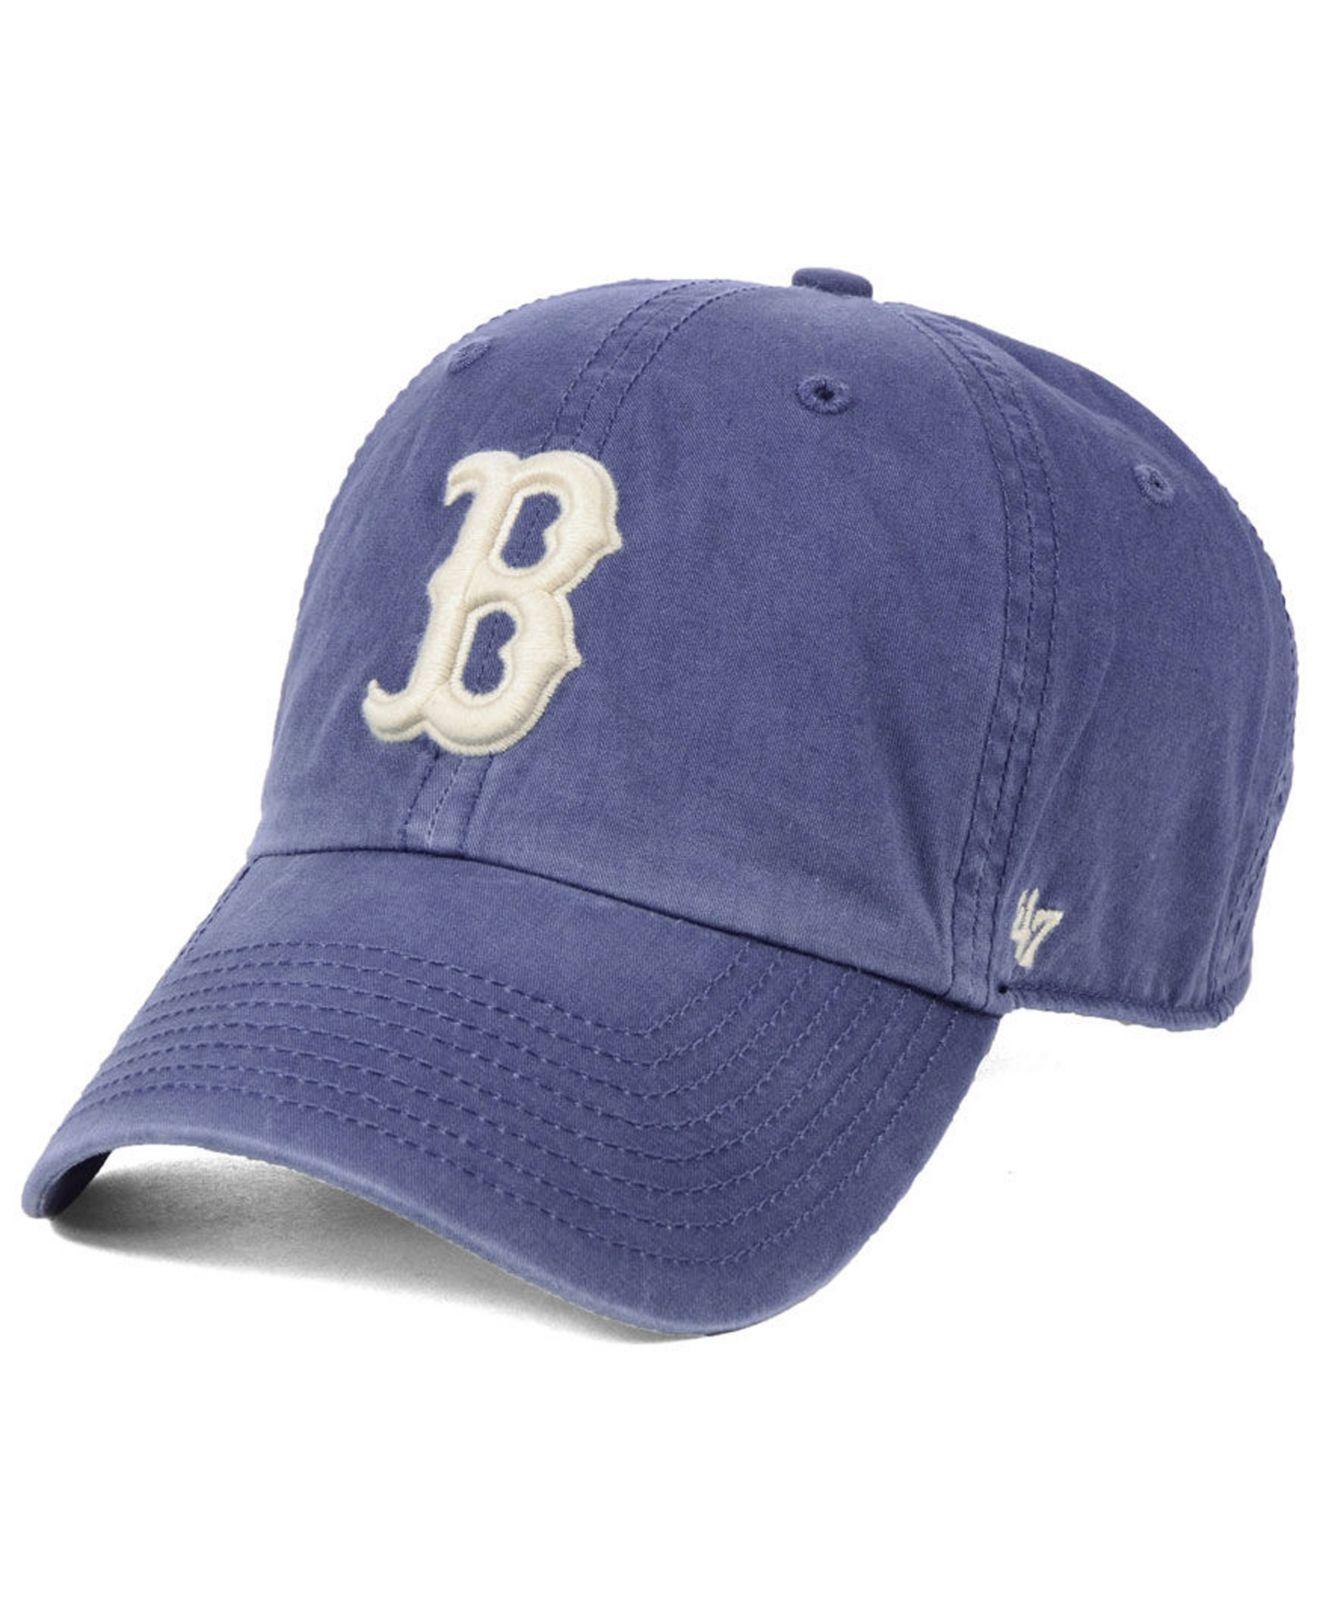 47 Brand Relaxed Fit Cap HUDSON New York Yankees navy 